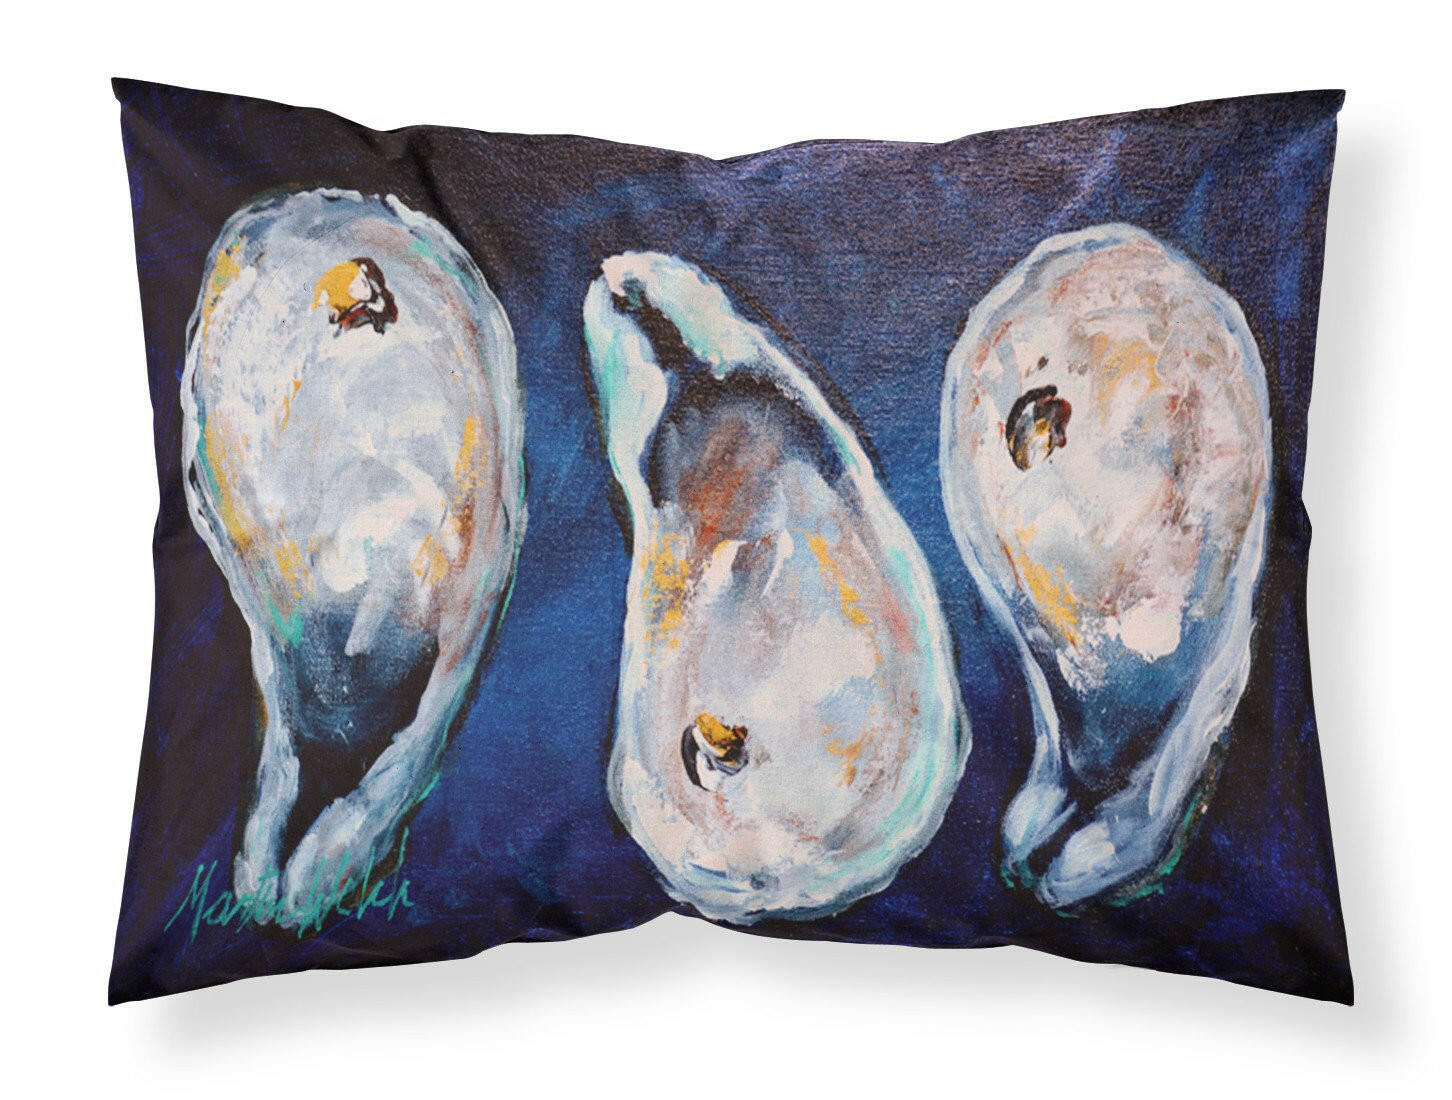 Oysters Give Me More Moisture wicking Fabric standard pillowcase by Caroline's Treasures